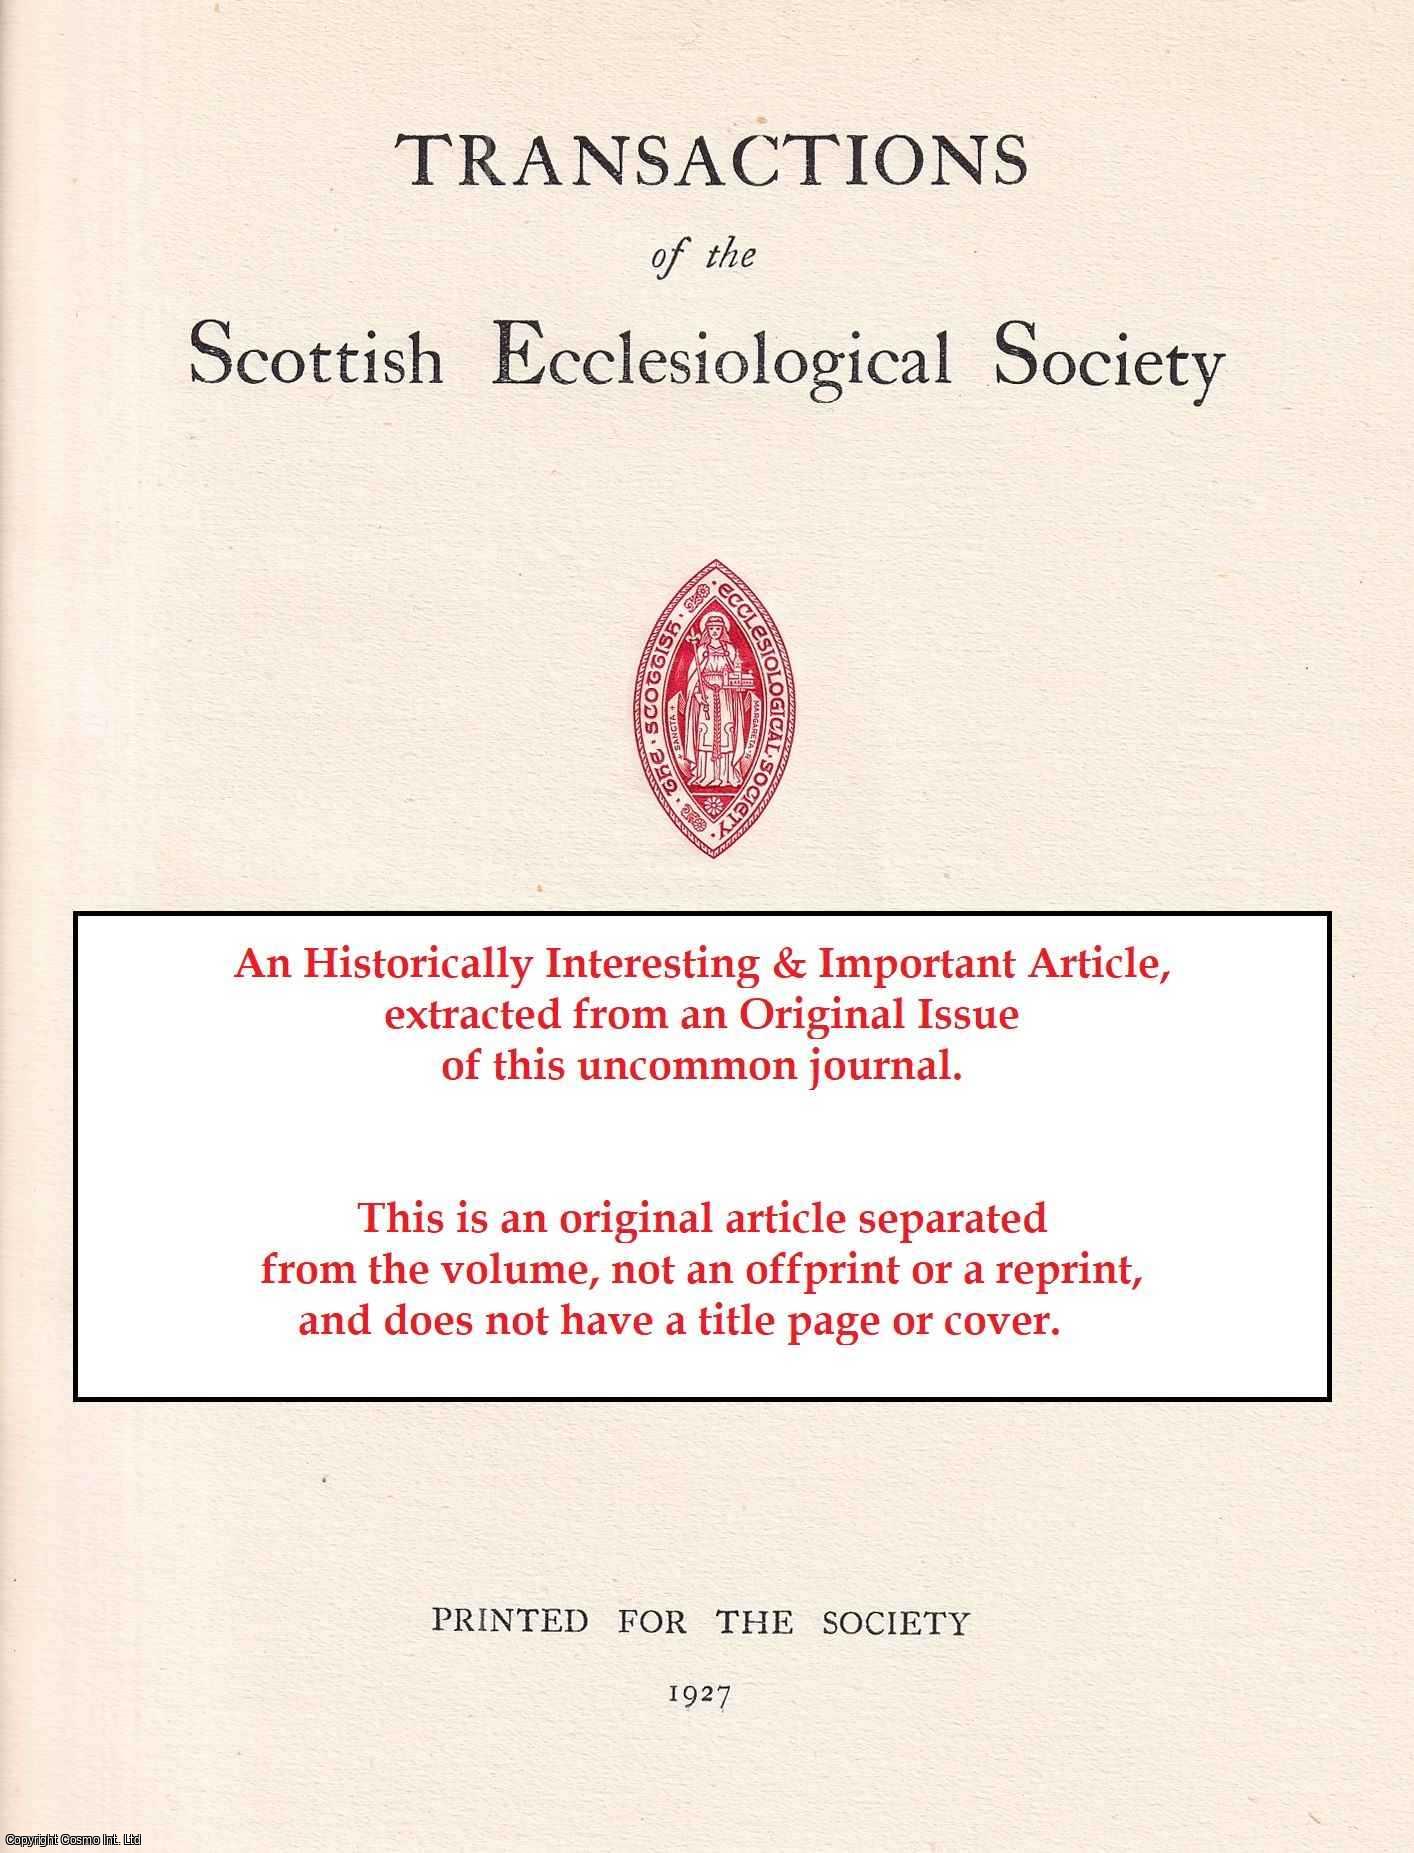 J.M. Mackinlay - A Study in Popular Hagiology: from Barnabe Googe's 'The Popish Kingdome'. An original article from the Transactions of the Scottish Ecclesiological Society, 1915.